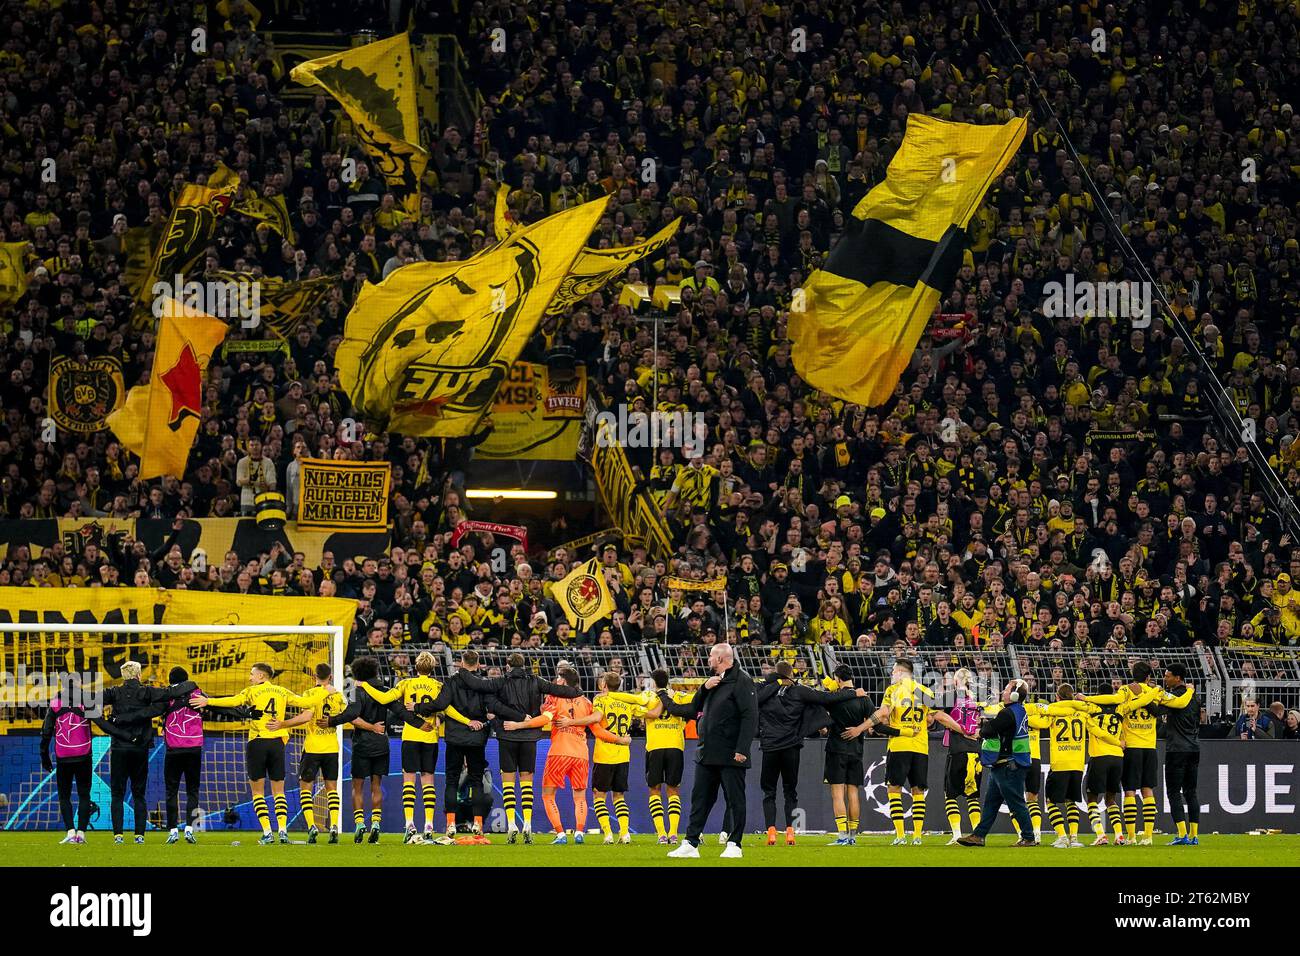 DORTMUND, GERMANY - NOVEMBER 7: Nico Schlotterbeck of Borussia Dortmund, Ramy Bensebaini of Borussia Dortmund, Karim Adeyemi of Borussia Dortmund, Julian Brandt of Borussia Dortmund, Niclas Fullkrug of Borussia Dortmund, Gregor Kobel of Borussia Dortmund, Julian Ryerson of Borussia Dortmund, Felix Nmecha of Borussia Dortmund, Niklas Sule of Borussia Dortmund, Marco Reus of Borussia Dortmund, Marcel Sabitzer of Borussia Dortmund, Youssoufa Moukoko of Borussia Dortmund, Mats Hummels of Borussia Dortmund thank their fans for their support after the UEFA Champions League Group F match between Boru Stock Photo